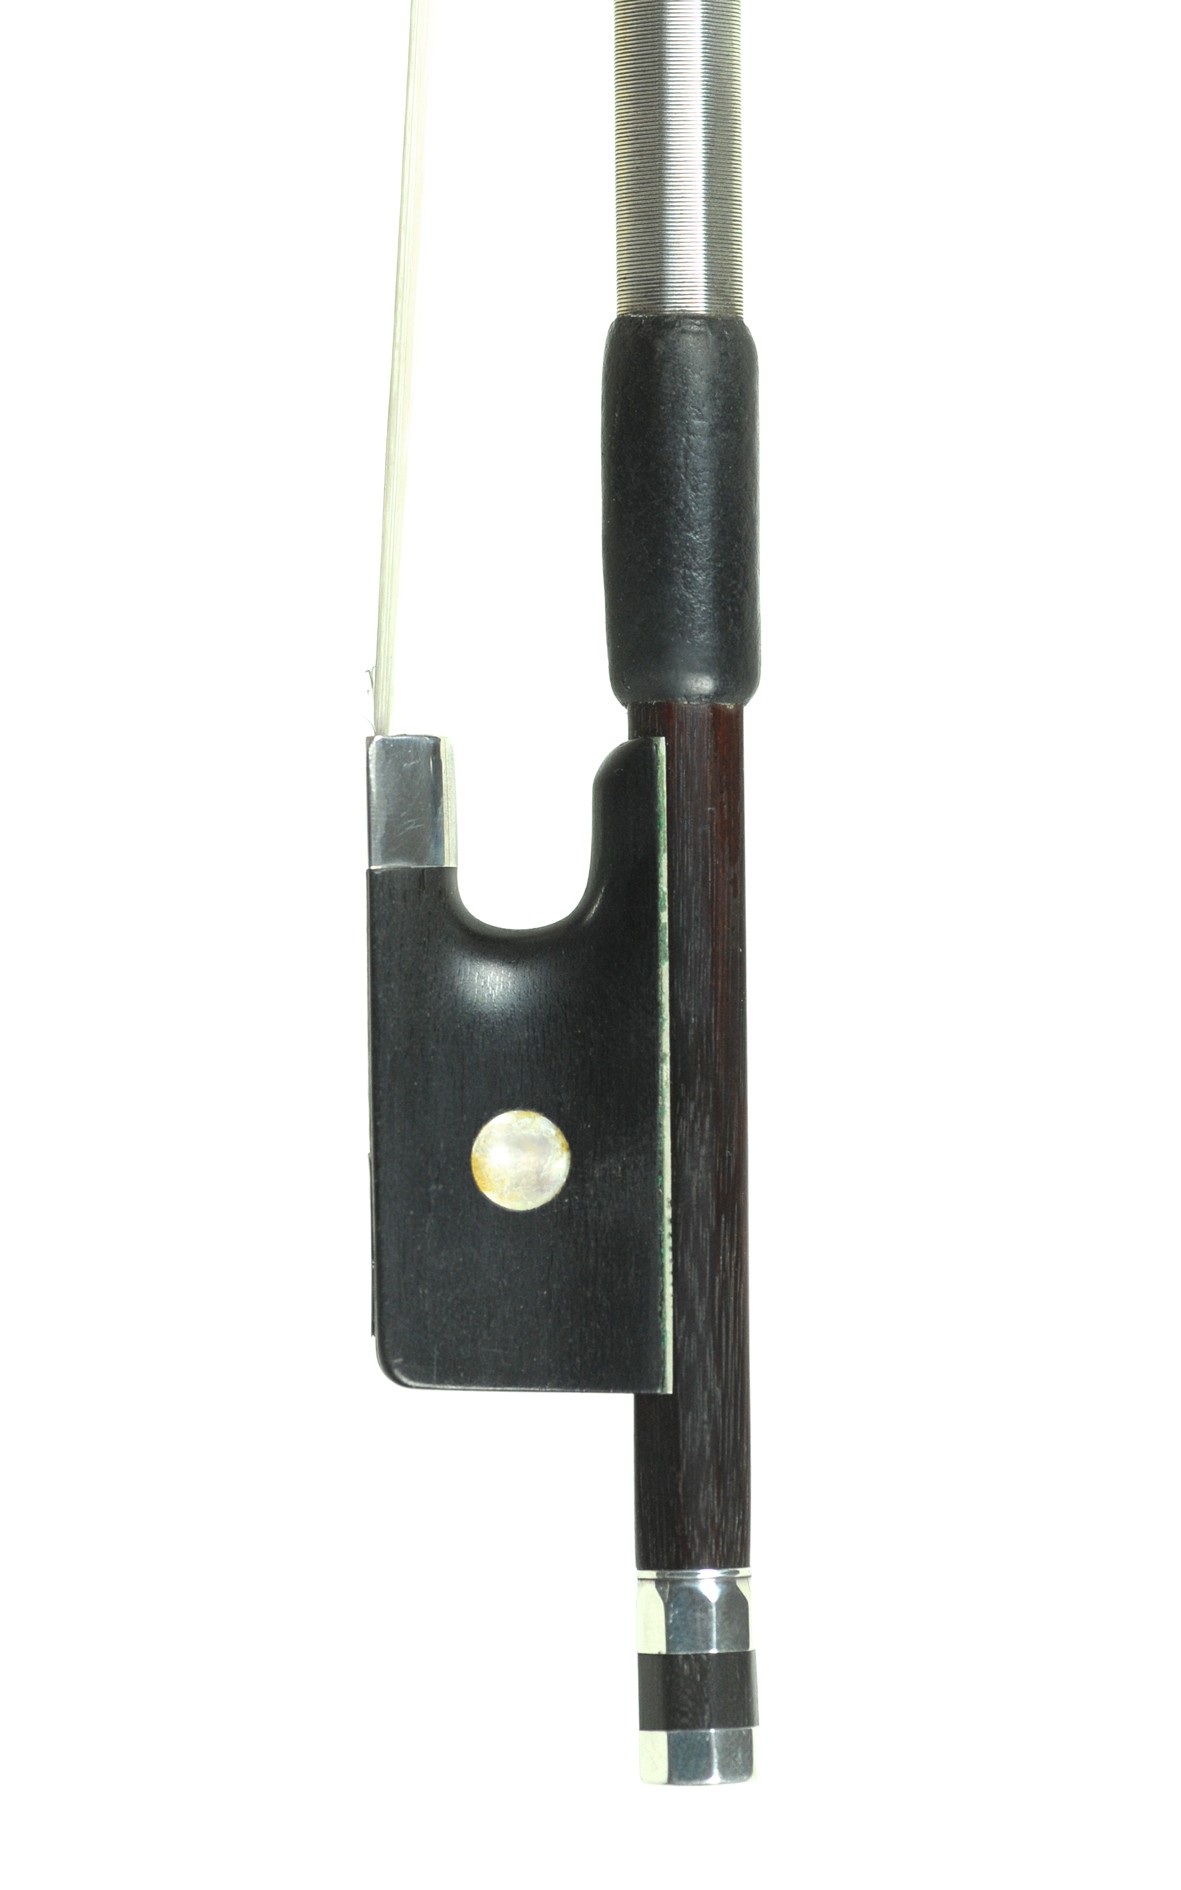 Antique, silver mounted viola bow. Fine German work, c.1910. Ebony frog with silver mounts.